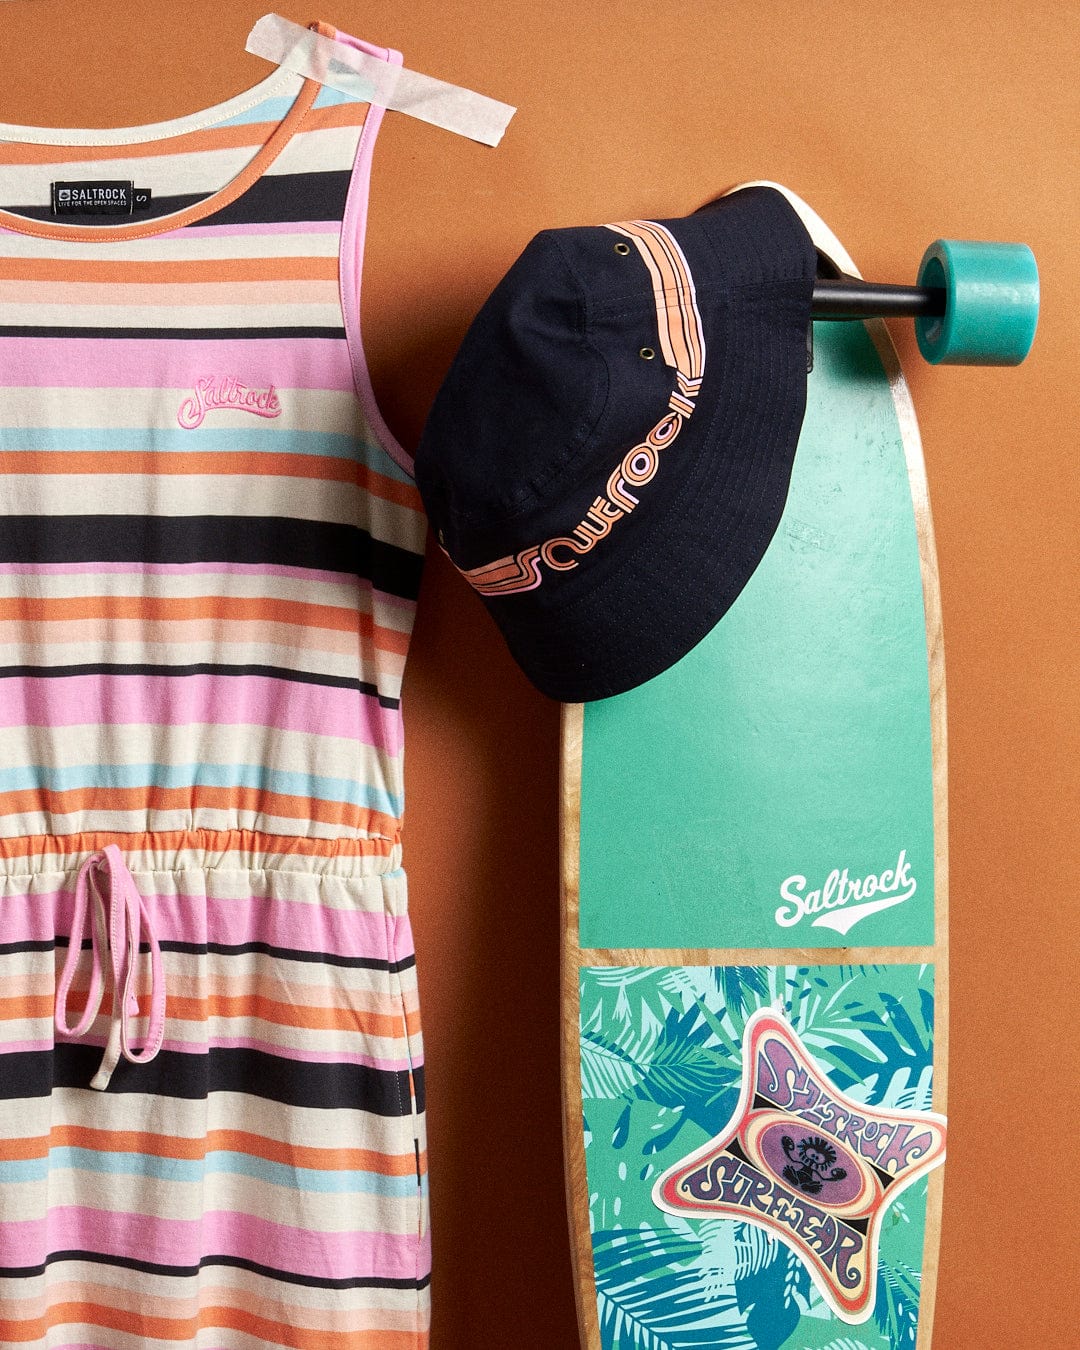 A Juno Bauhaus - Womens Stripe Dress - Multi from Saltrock with a skateboard and hat.